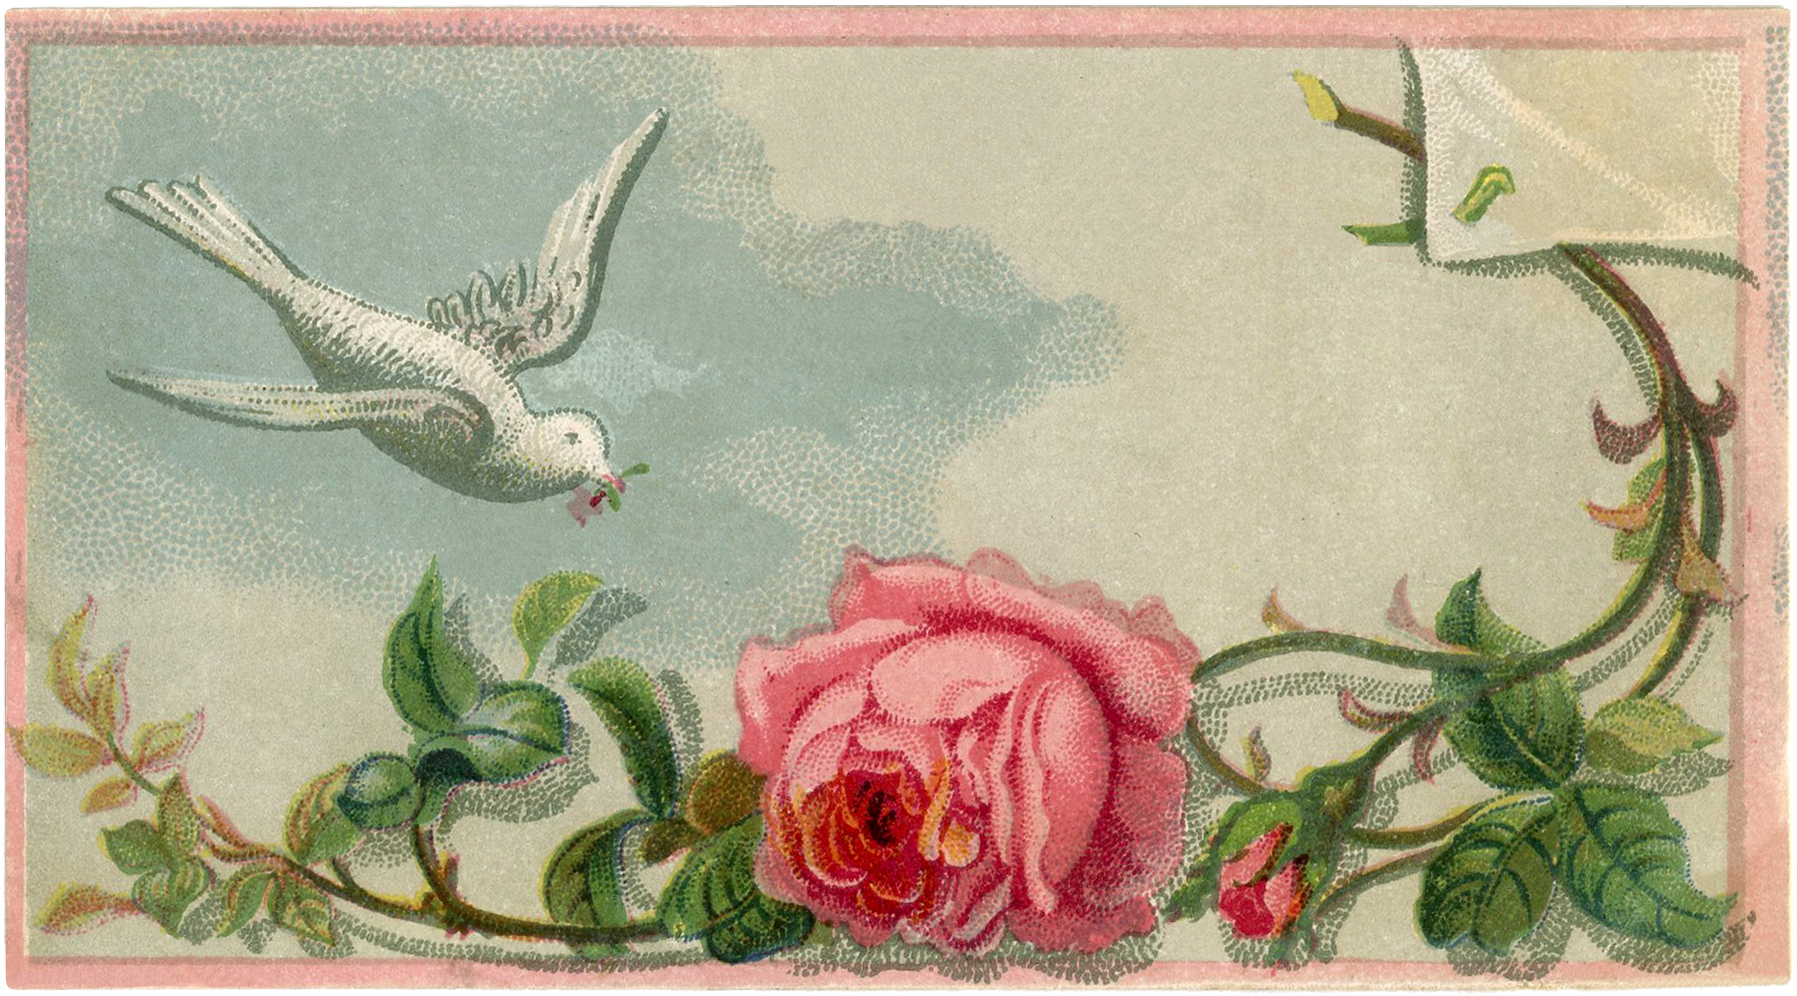 http://thegraphicsfairy.com/wp-content/uploads/2015/05/Vintage-Bird-with-Rose-Image-GraphicsFairy.jpg